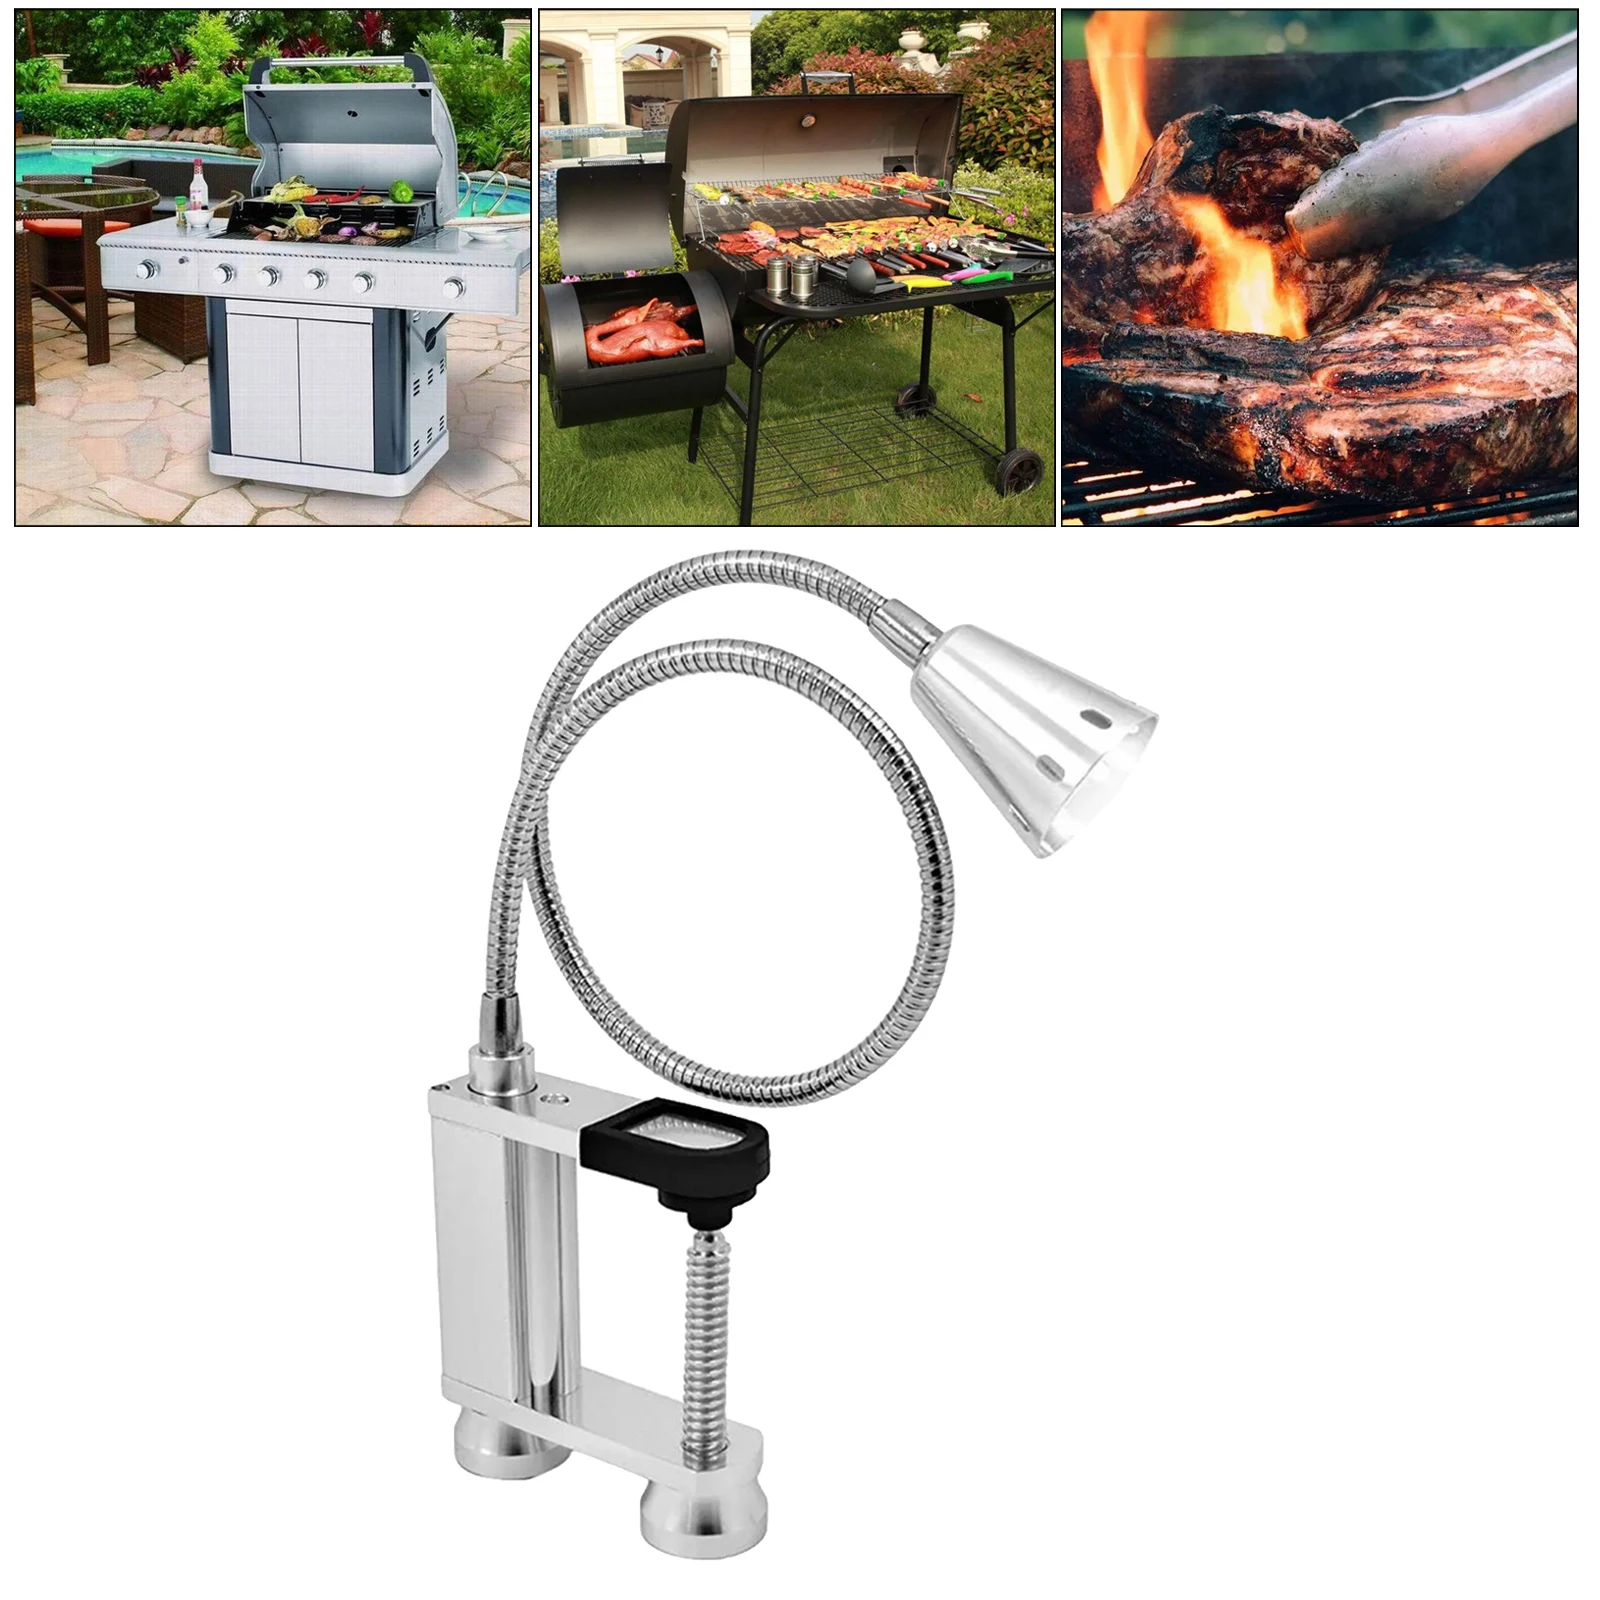 Magnetic Led Grill Light Adjustable Flexible Gooseneck Screw Clamp for Party Office Outdoor Indoor Barbeque Lamps